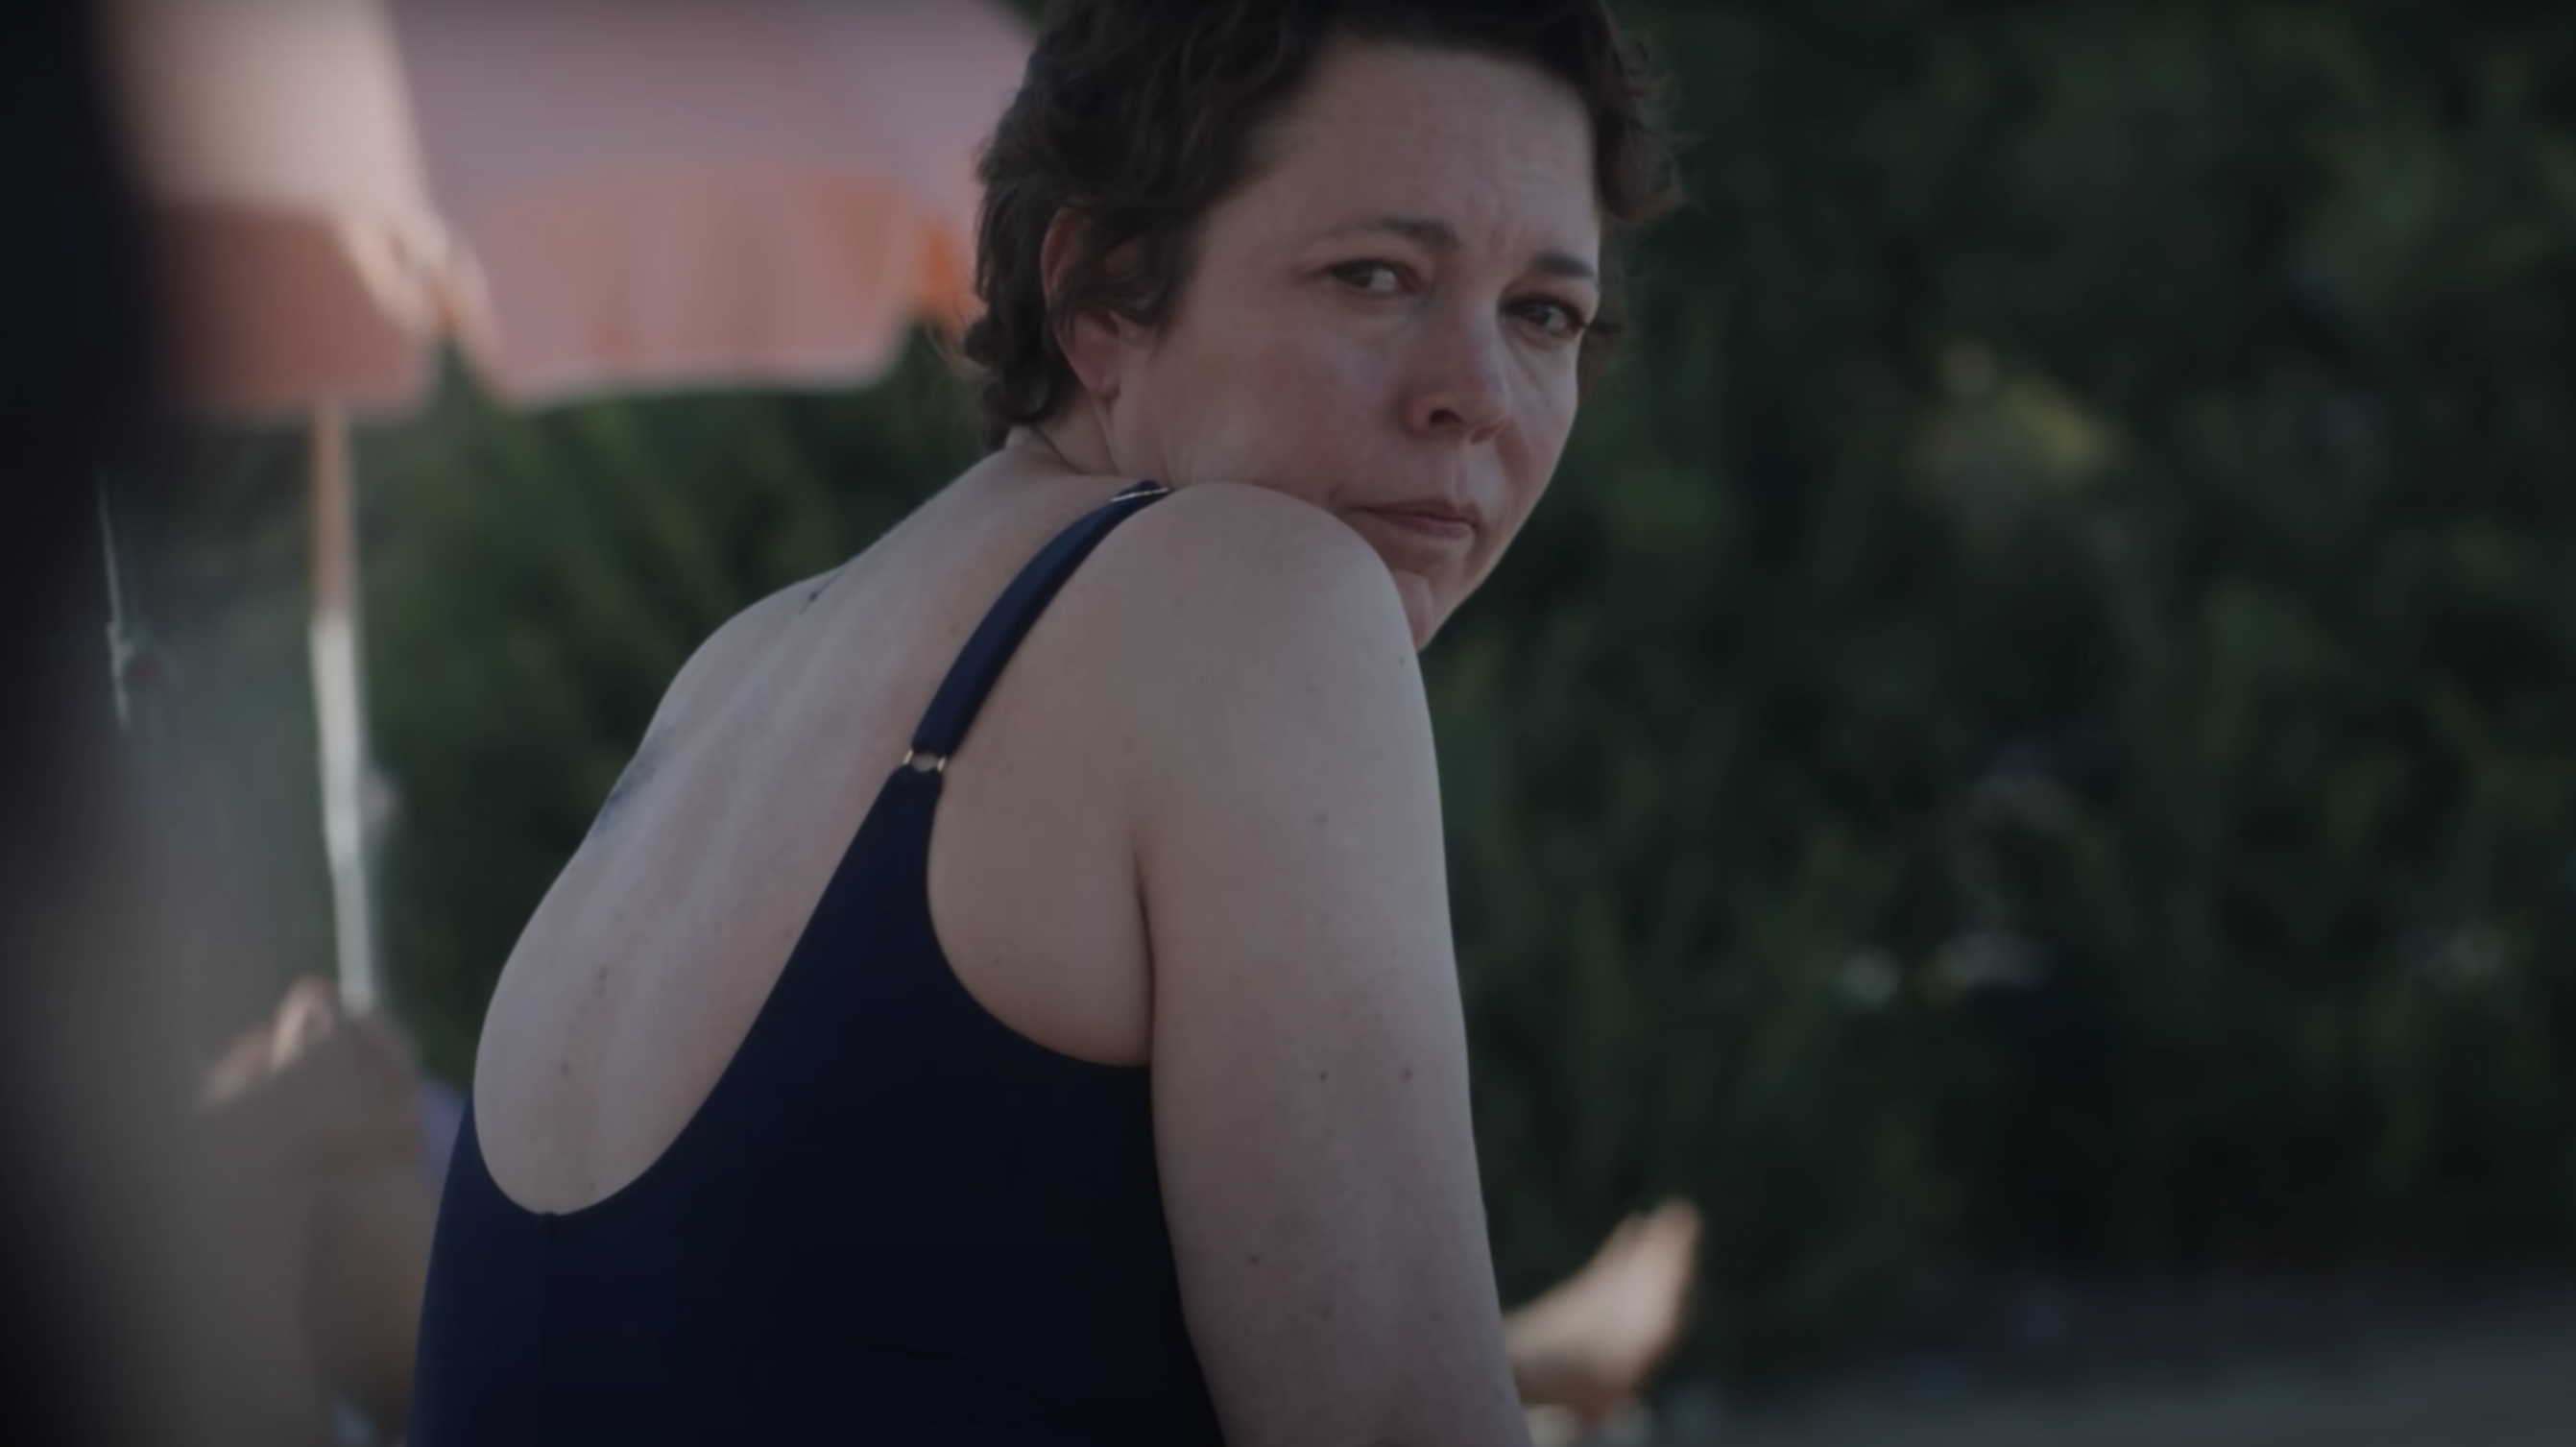 Olivia Colman plays a grief-stricken mother in trailer for Maggie Gyllenhaal’s The Lost Daughter